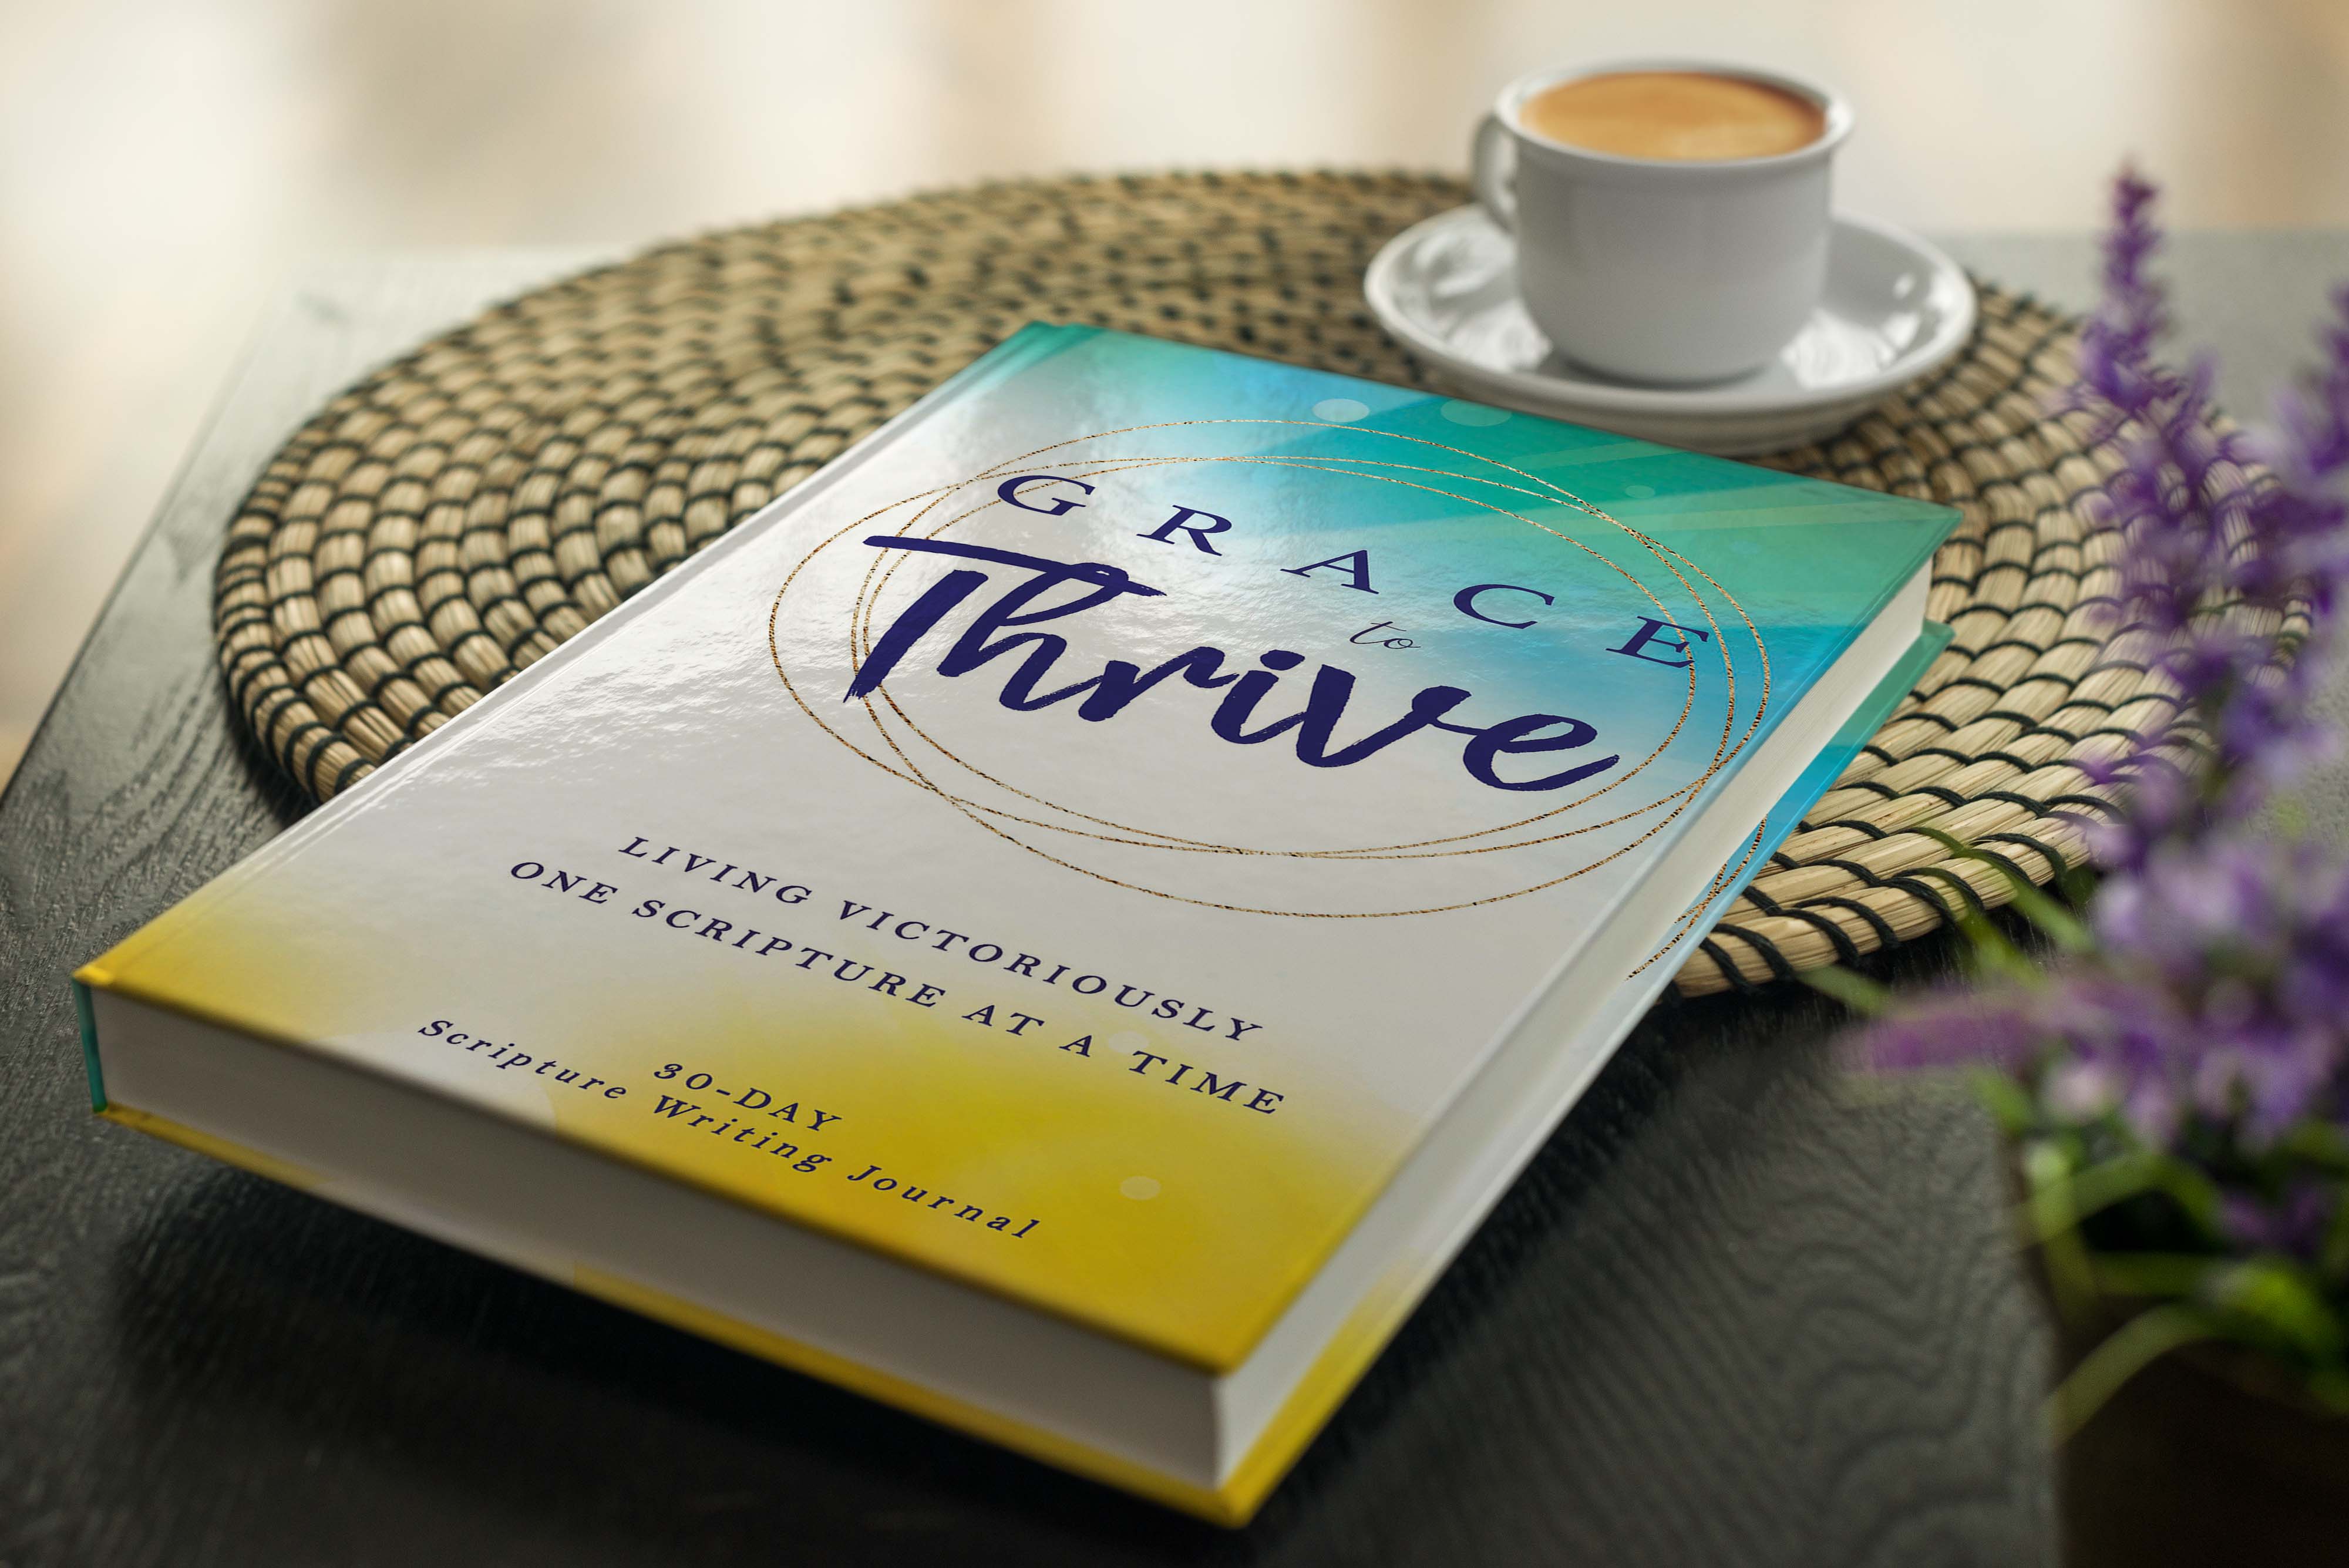 Grace to Thrive, Journal